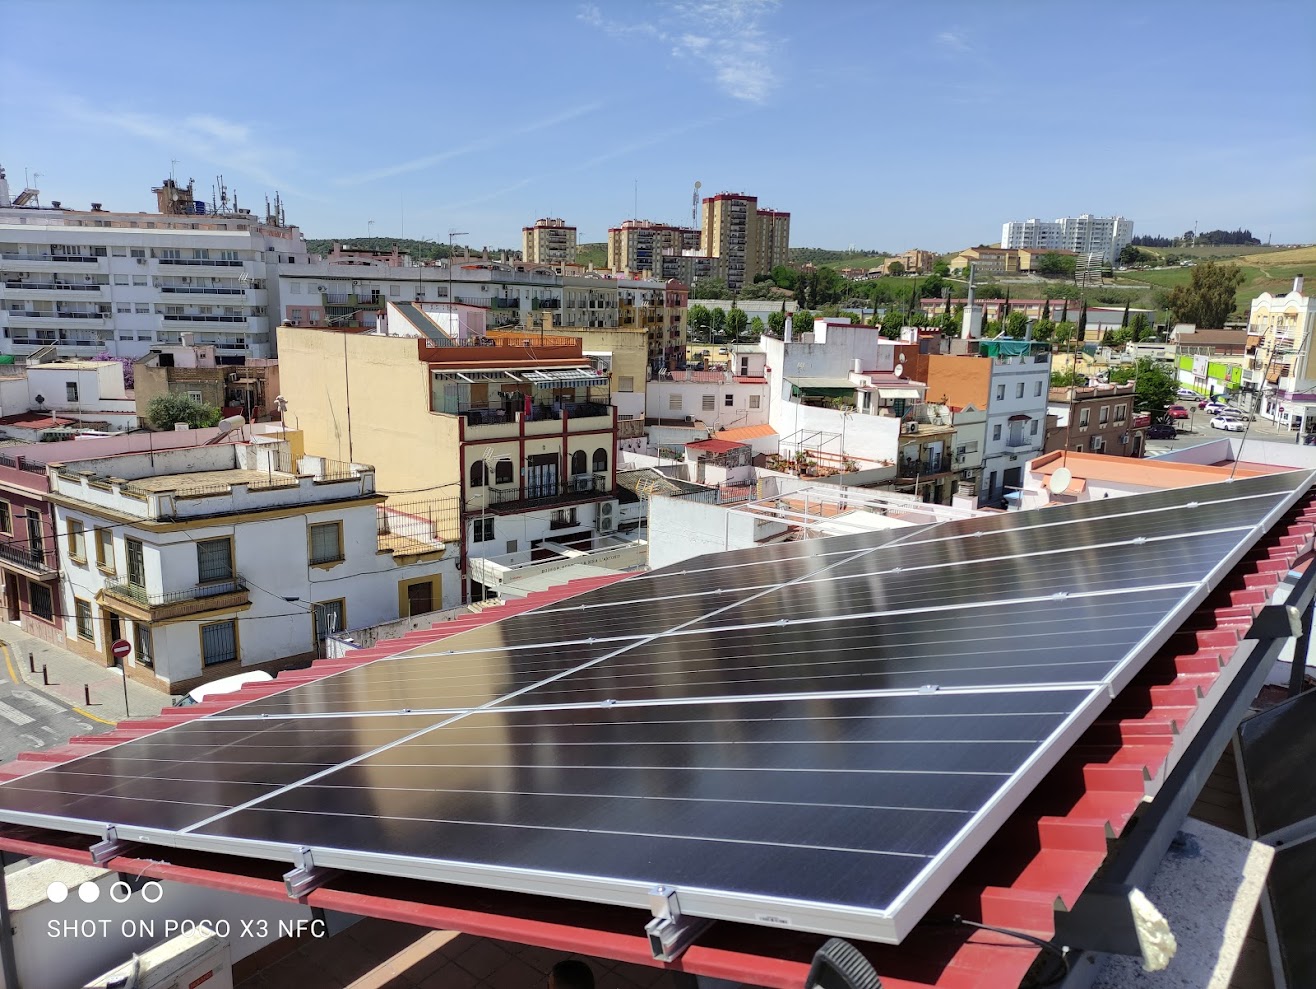 Images Solar Infinity Energia Renovable